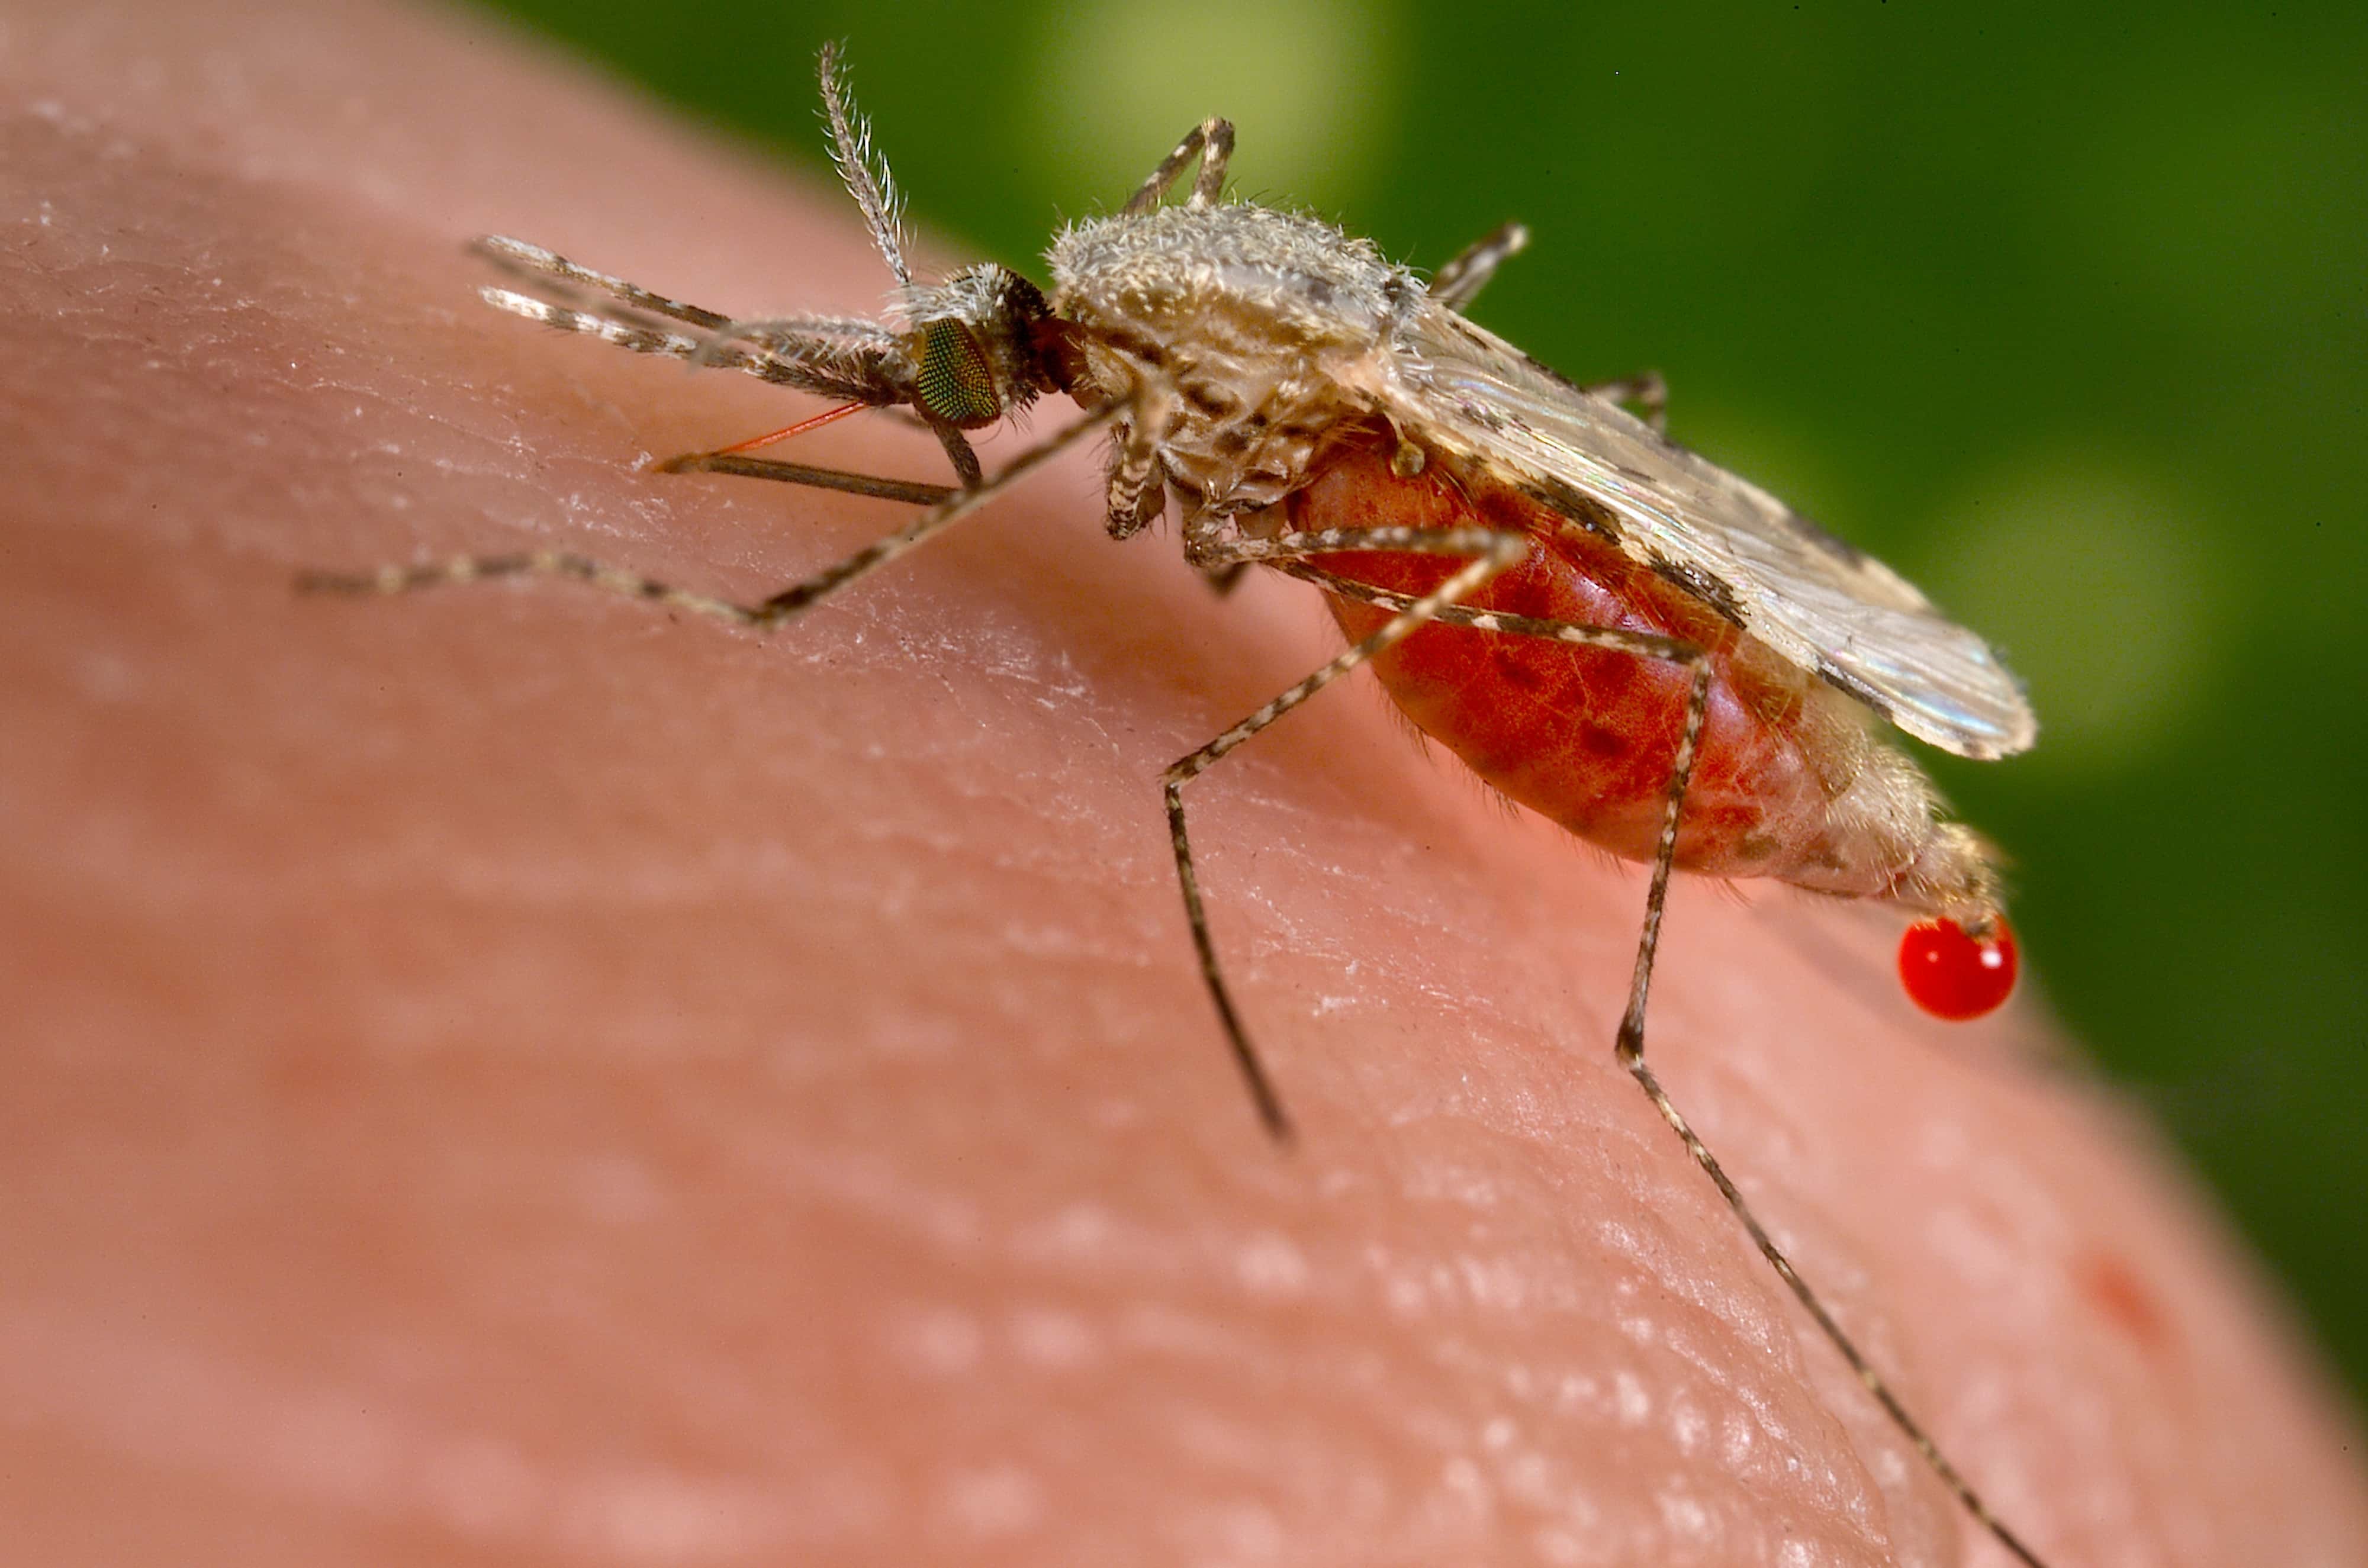 Study: Bacteria Could Stop Malaria Transmission